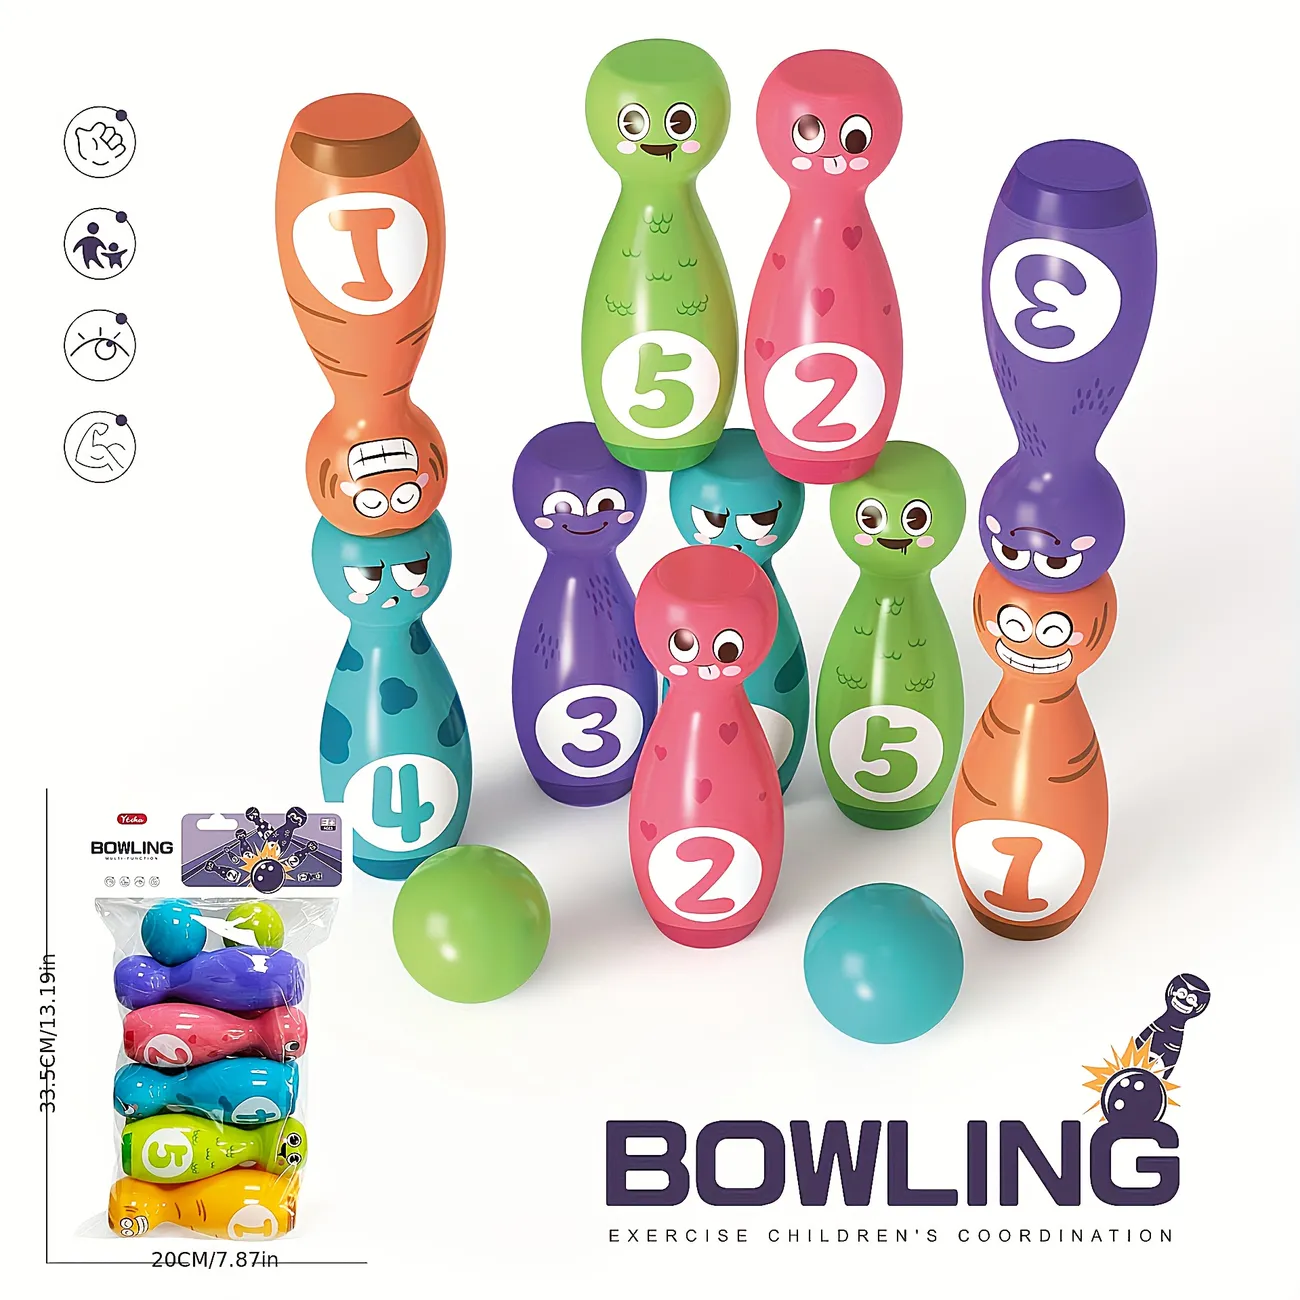 Interactive Bowling Game Set For Kids, Developing Gross and Fine Motor Skills, Color Recognition And Hand-eye Coordination